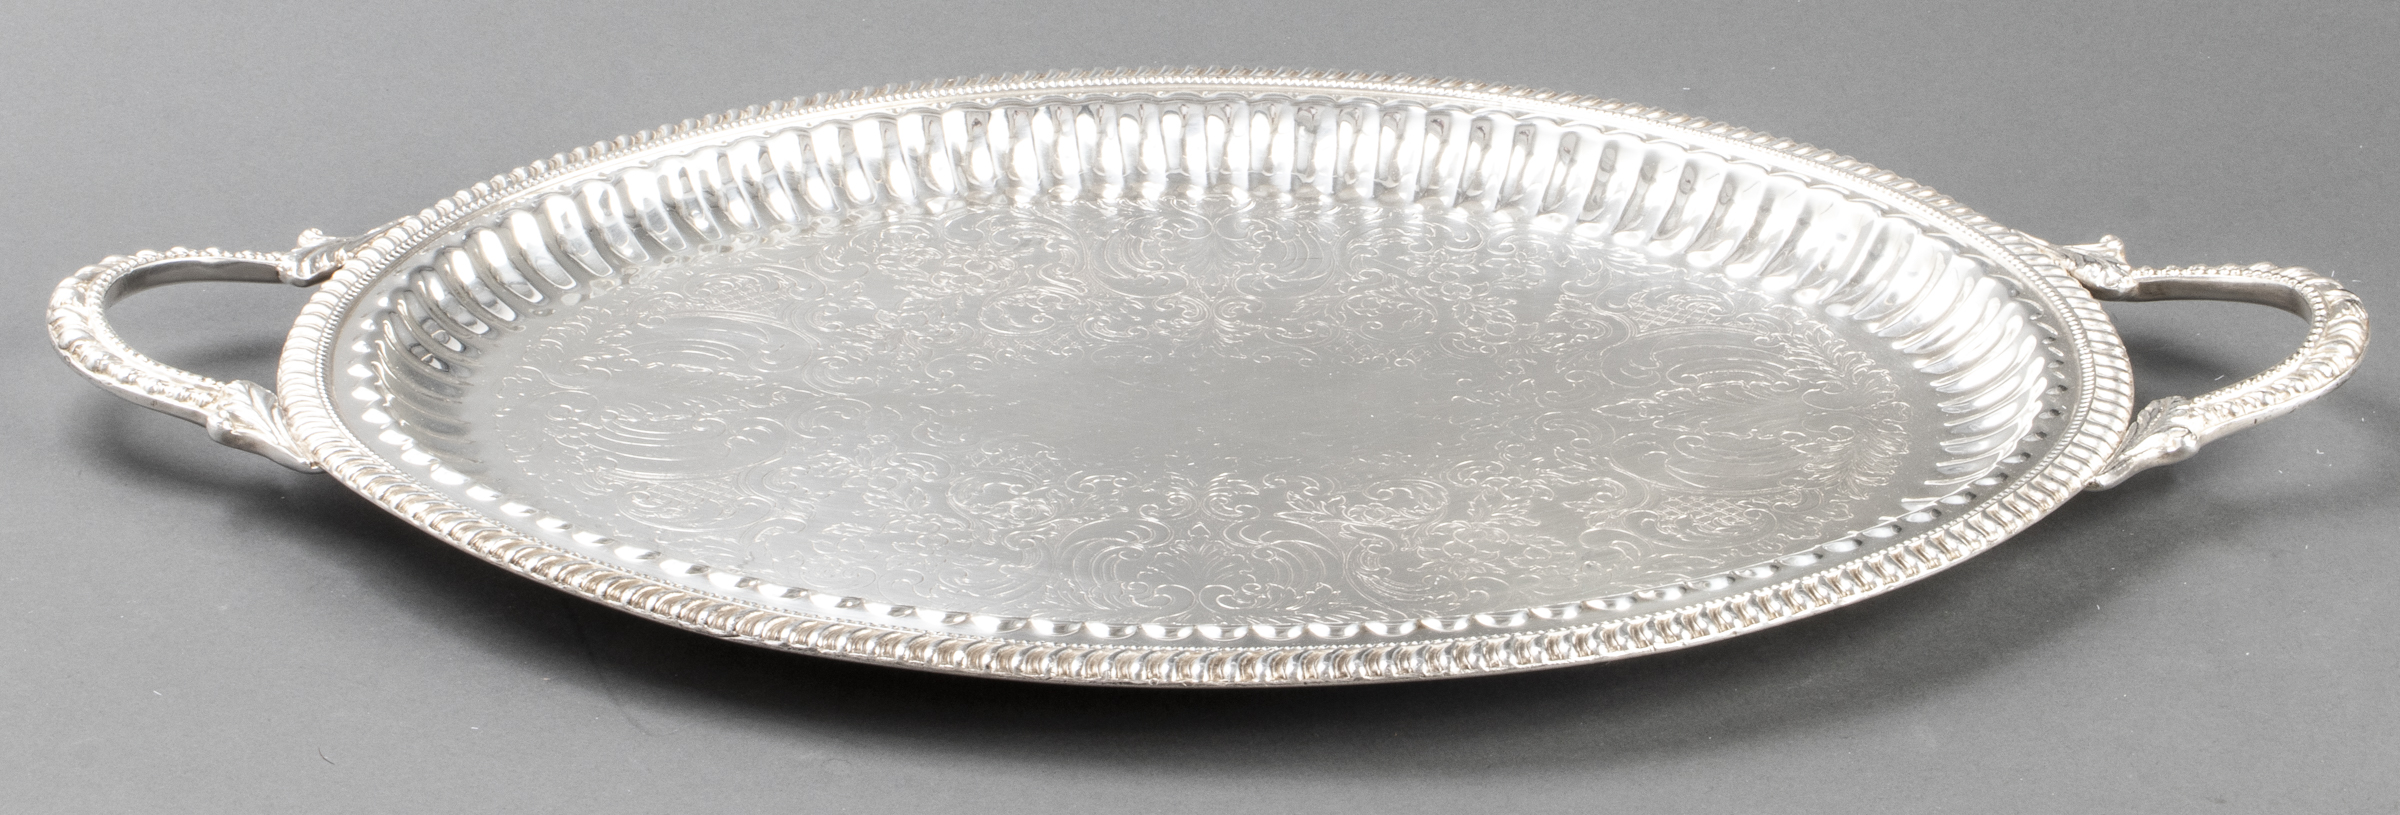 SILVERPLATE SERVING TRAY WITH ETCHED 3c3e1c